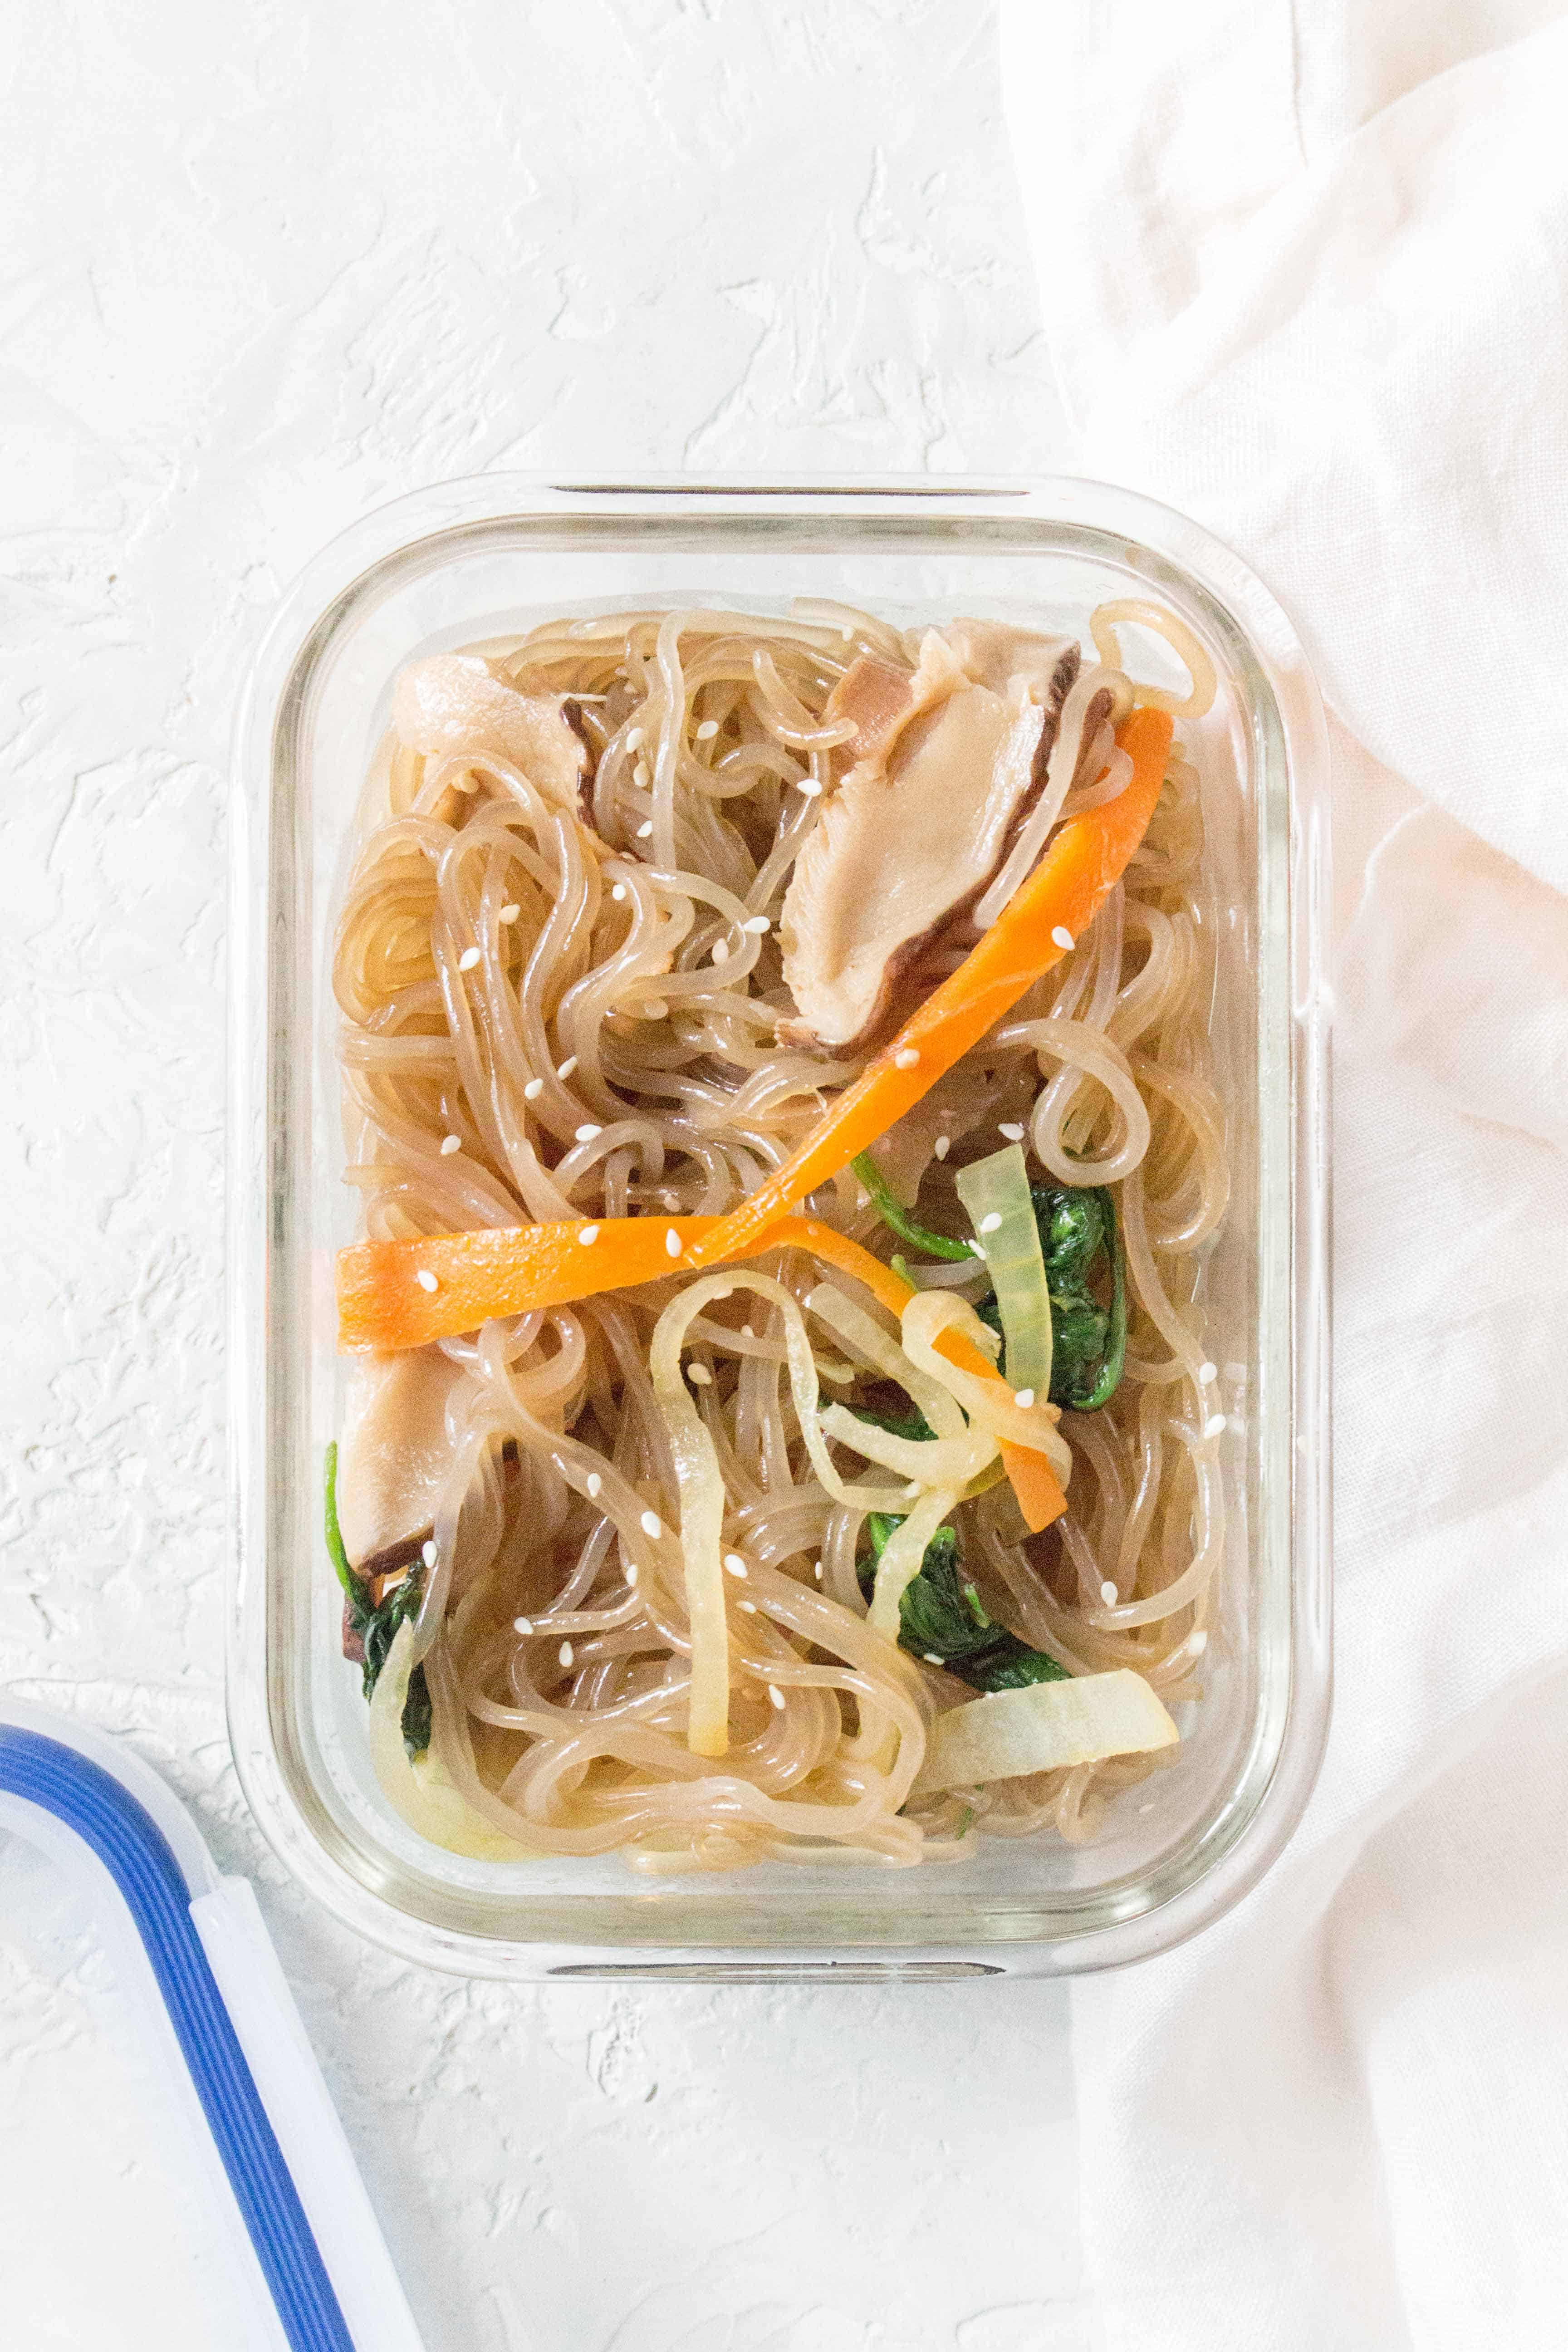 Ever wondered how to make Japchae at home? Here's a super quick and easy method! Japchae is the perfect dish for a potluck or as a meal prep!